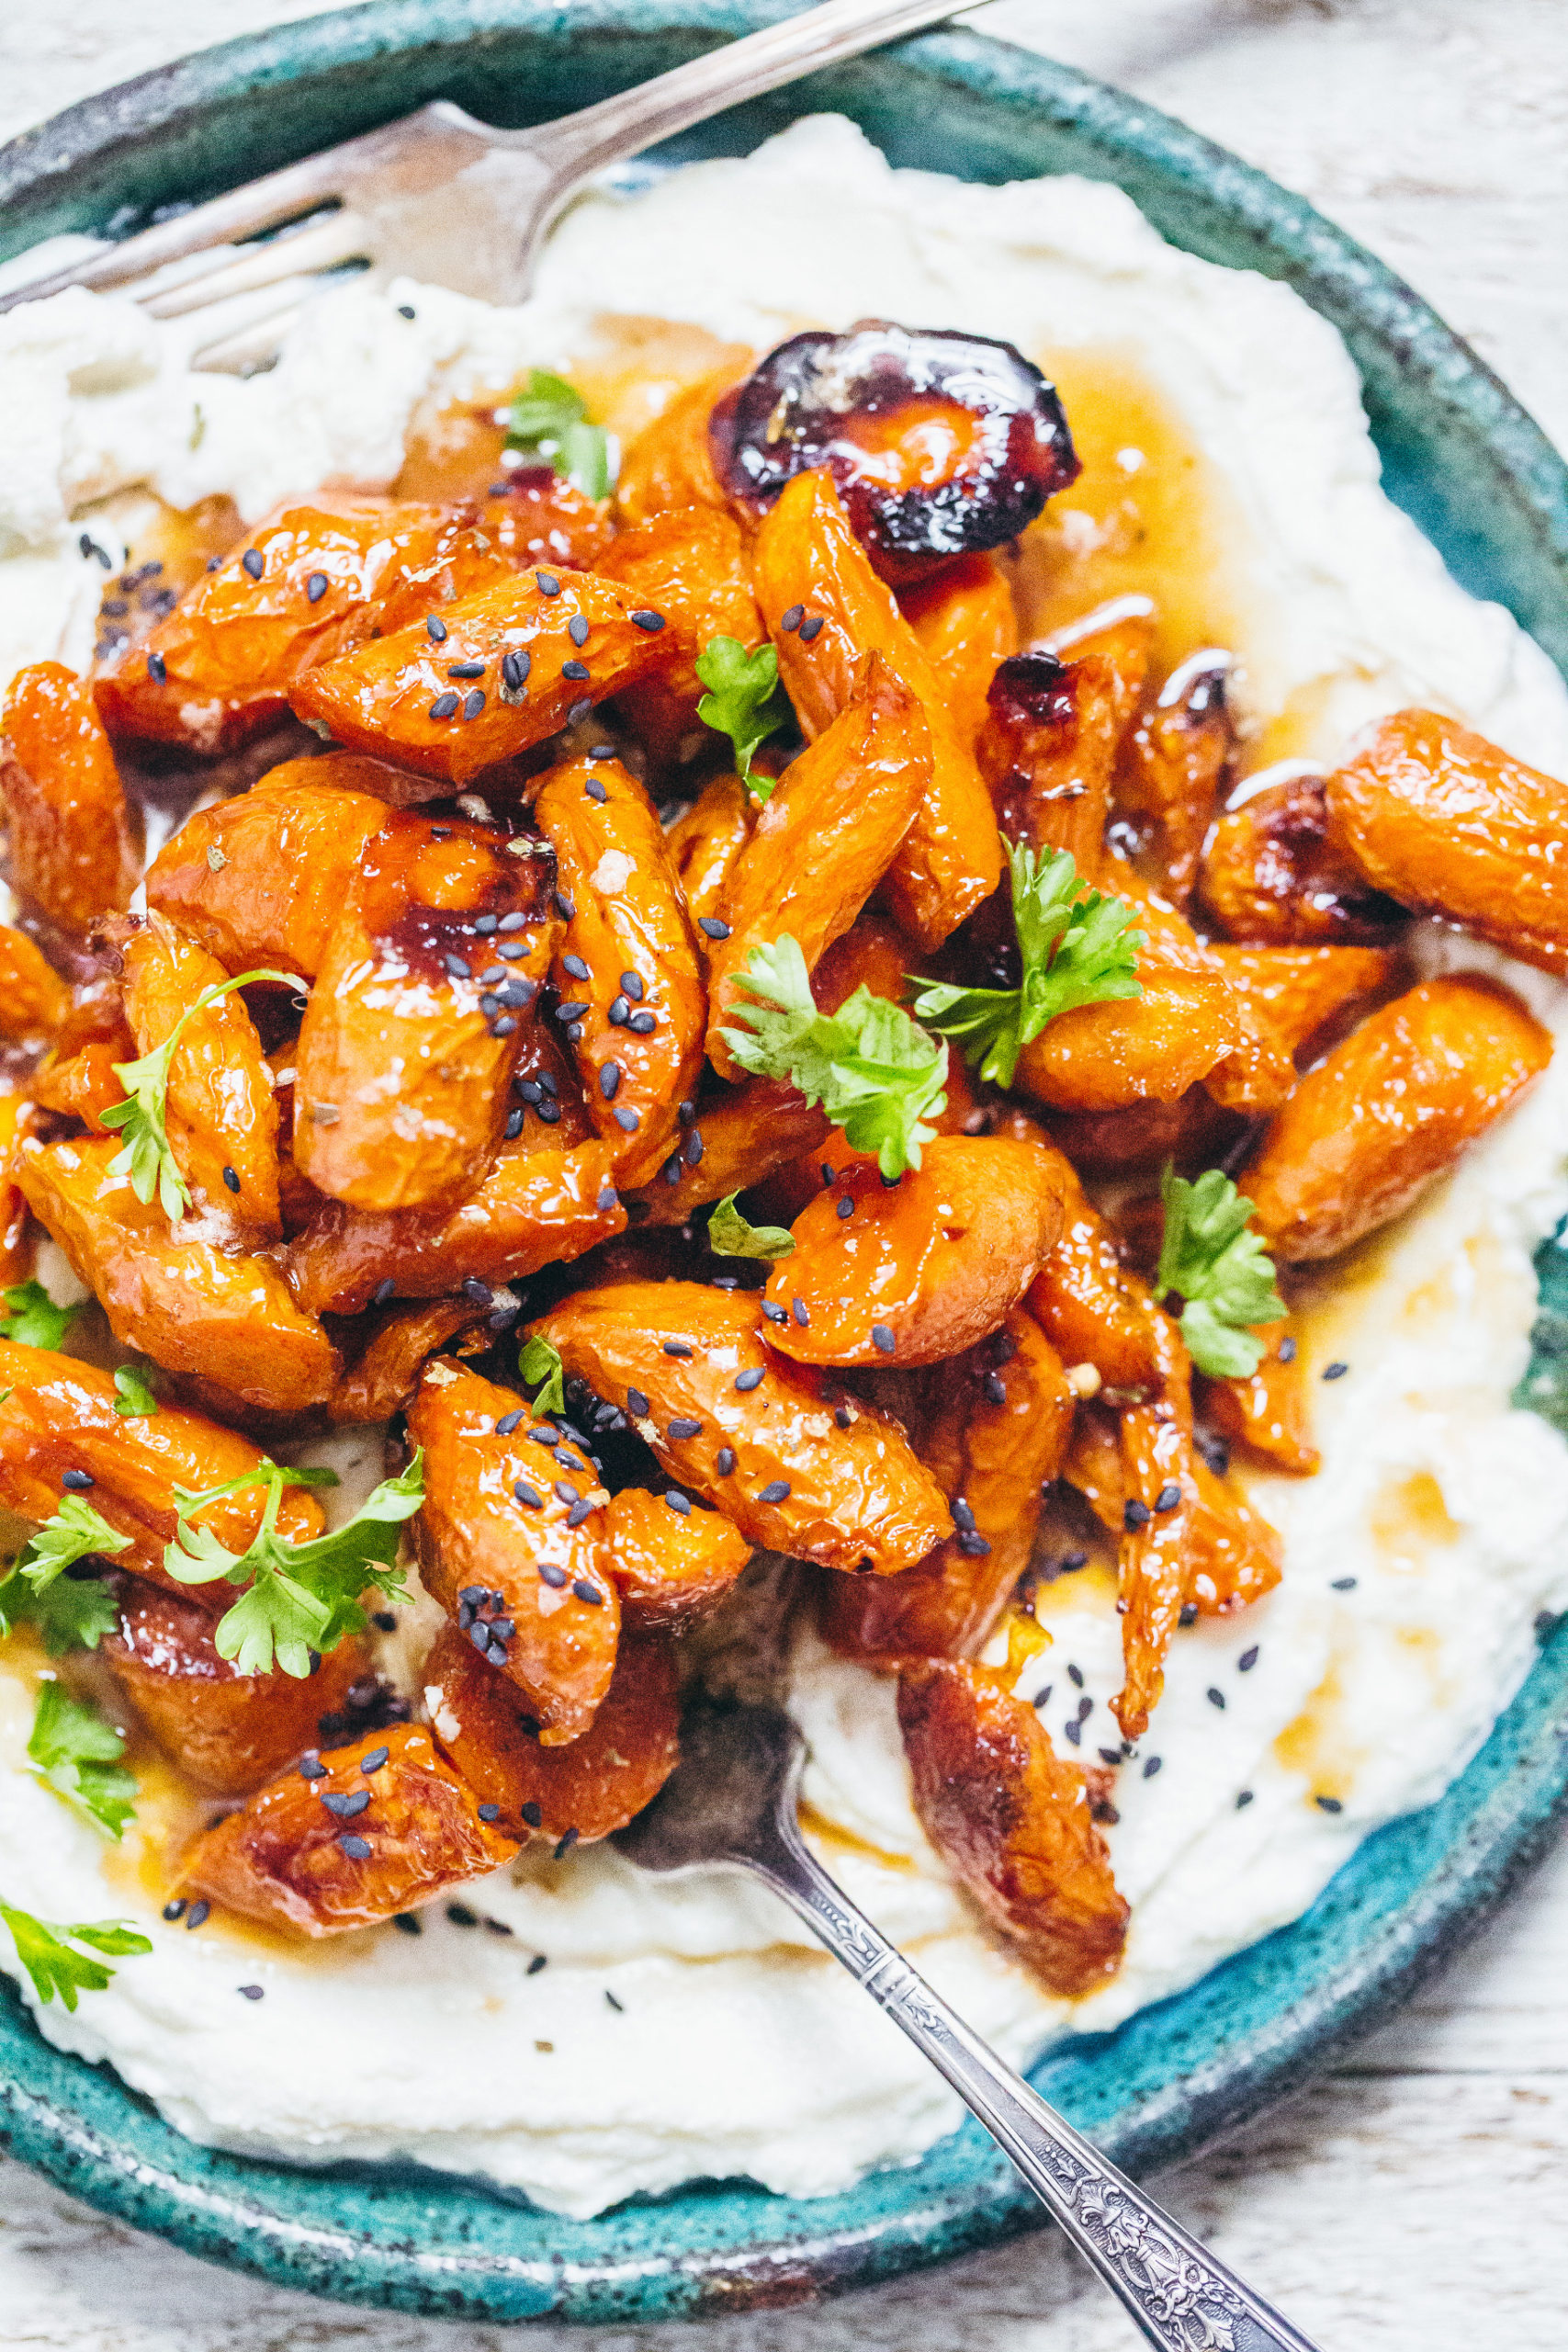 Hot Honey Buttered Carrots with Ricotta